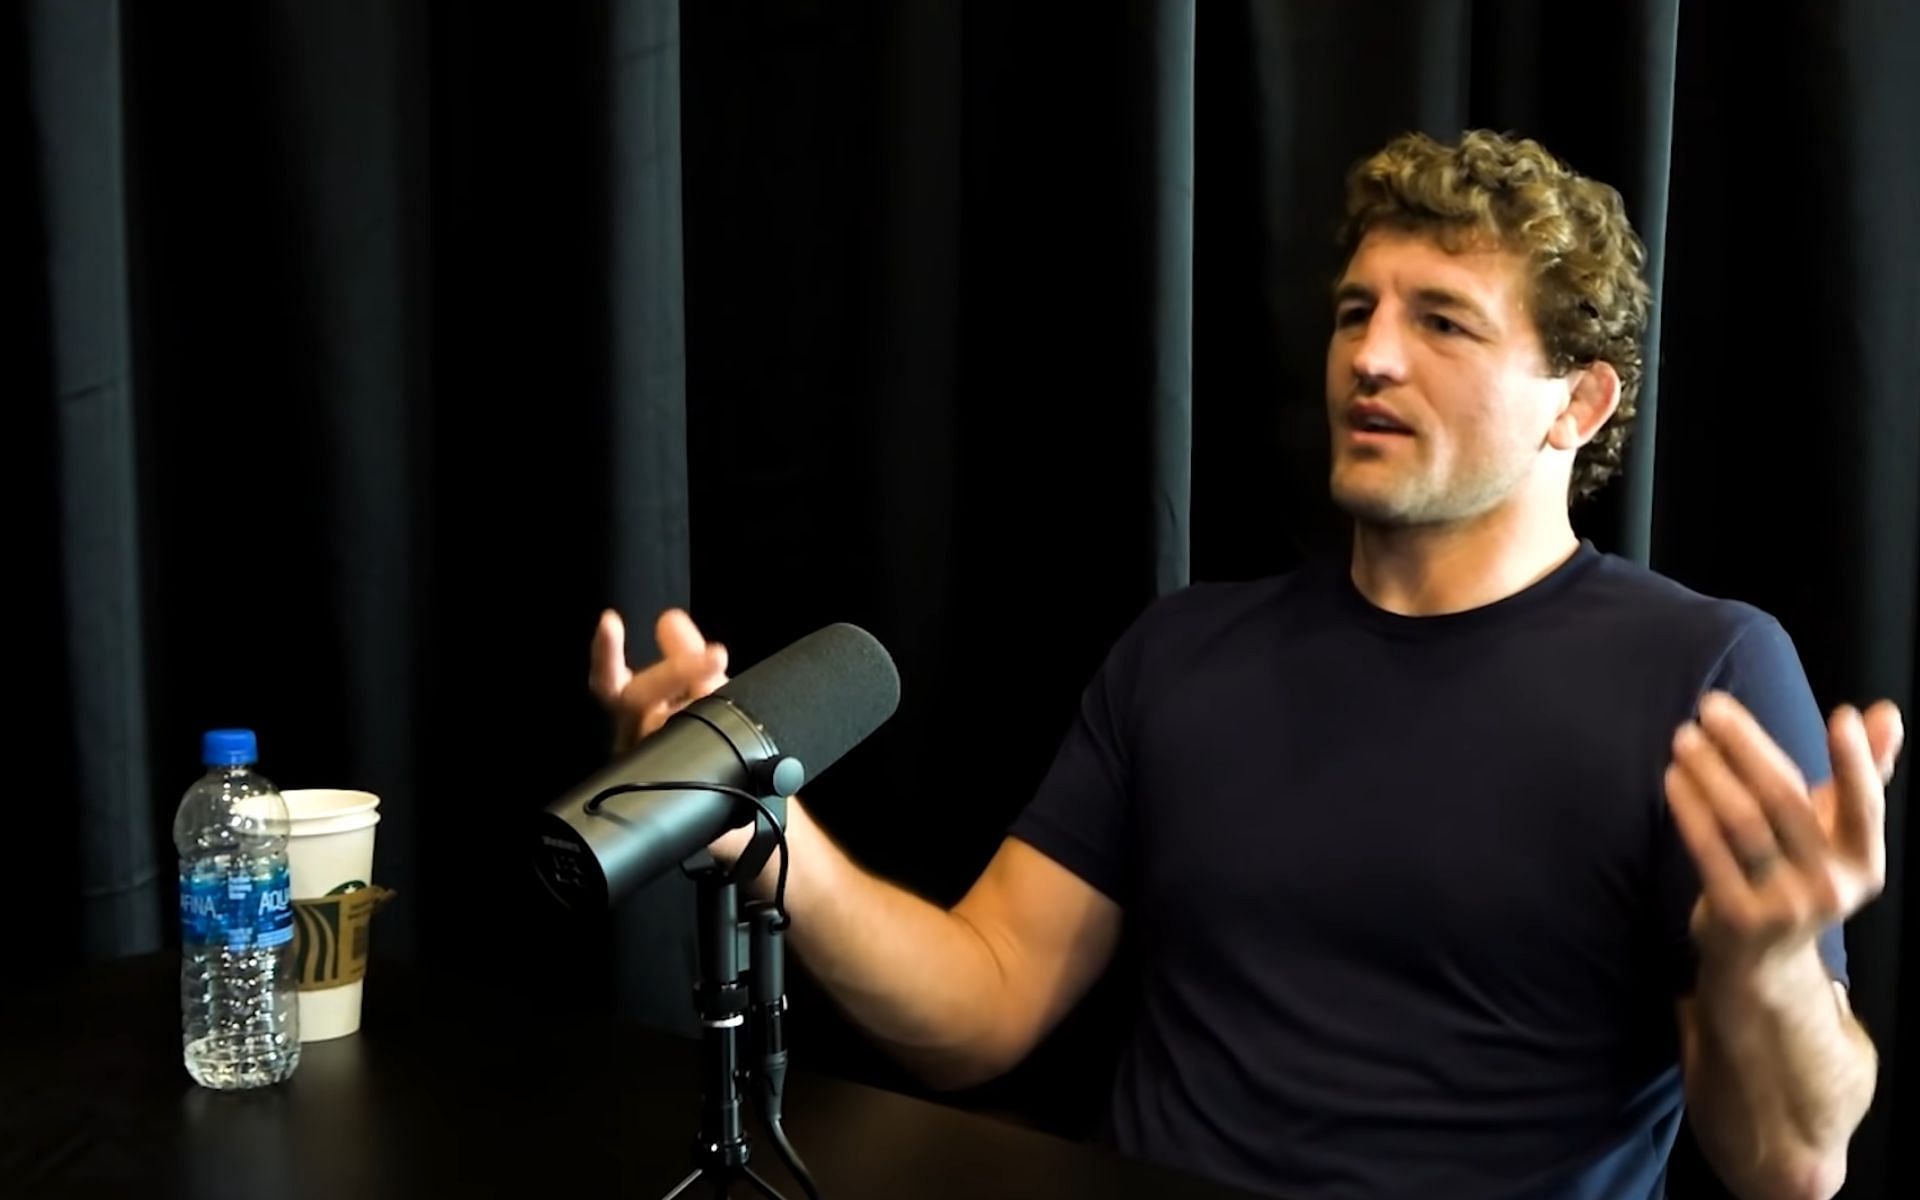 Ben Askren talks about the reason behind his shift from wrestling to MMA. (image source: Youtube/Lexclips